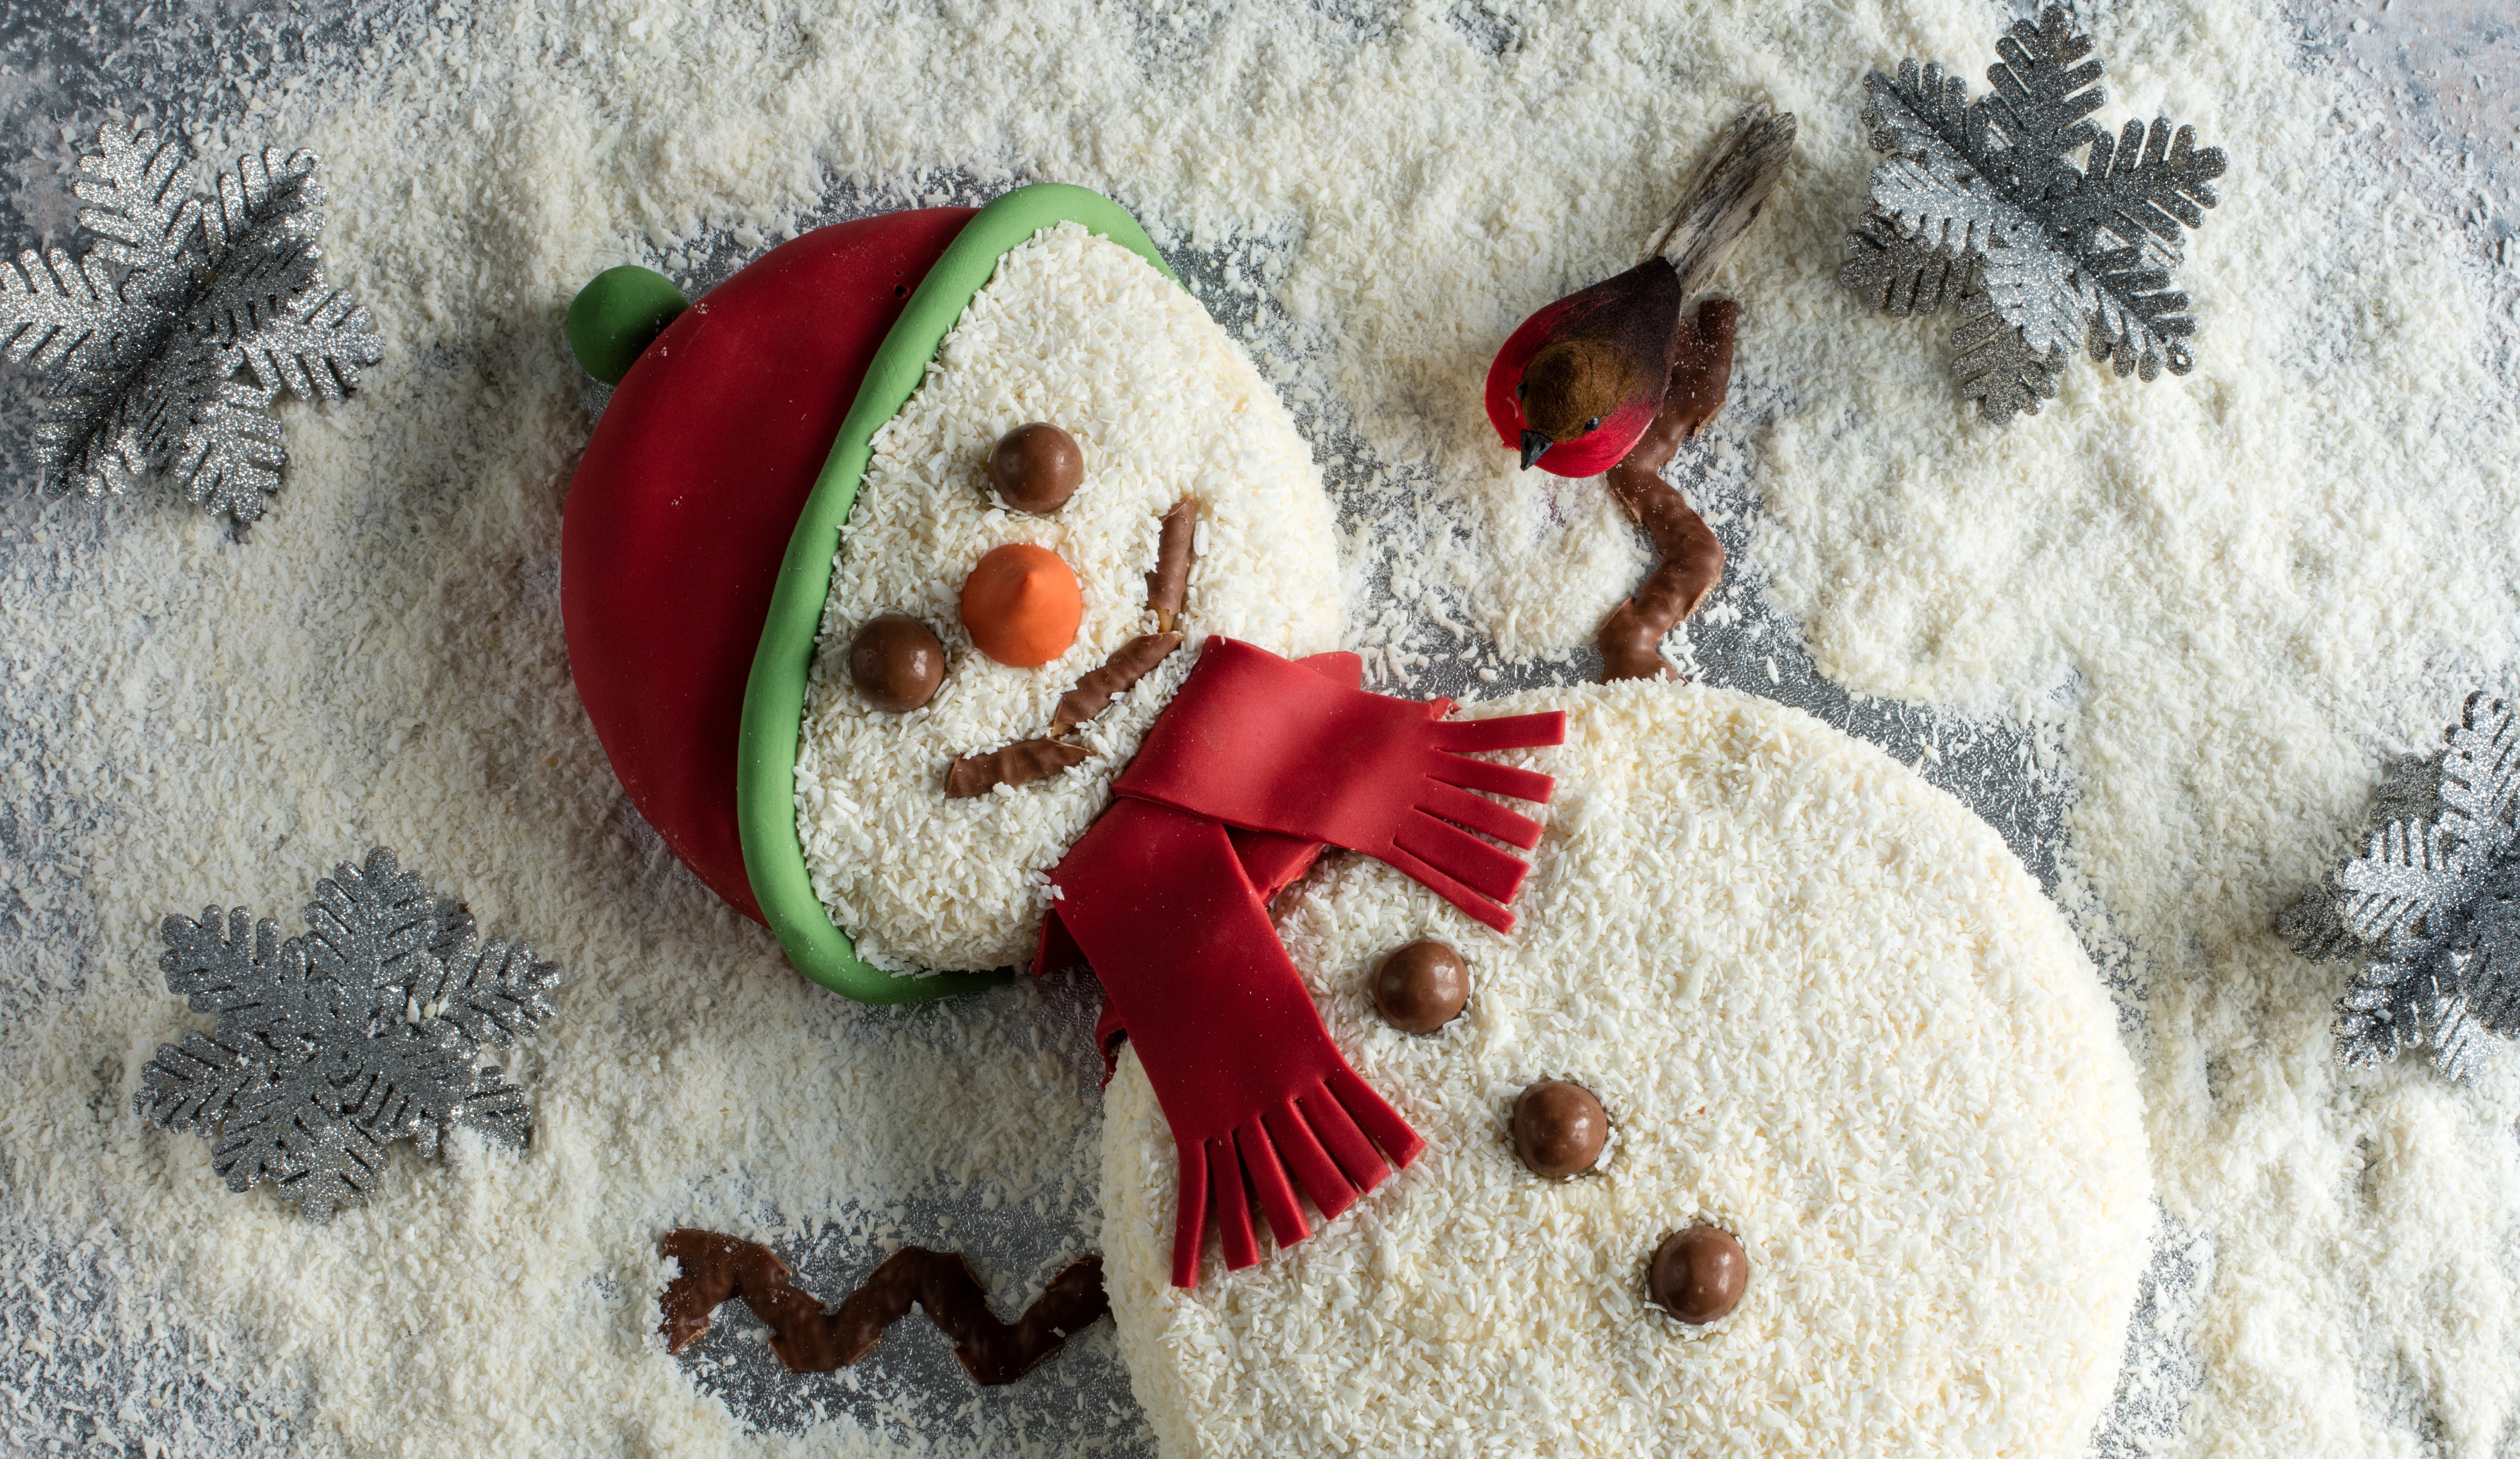 Snowman Cake Recipe: How to Make It